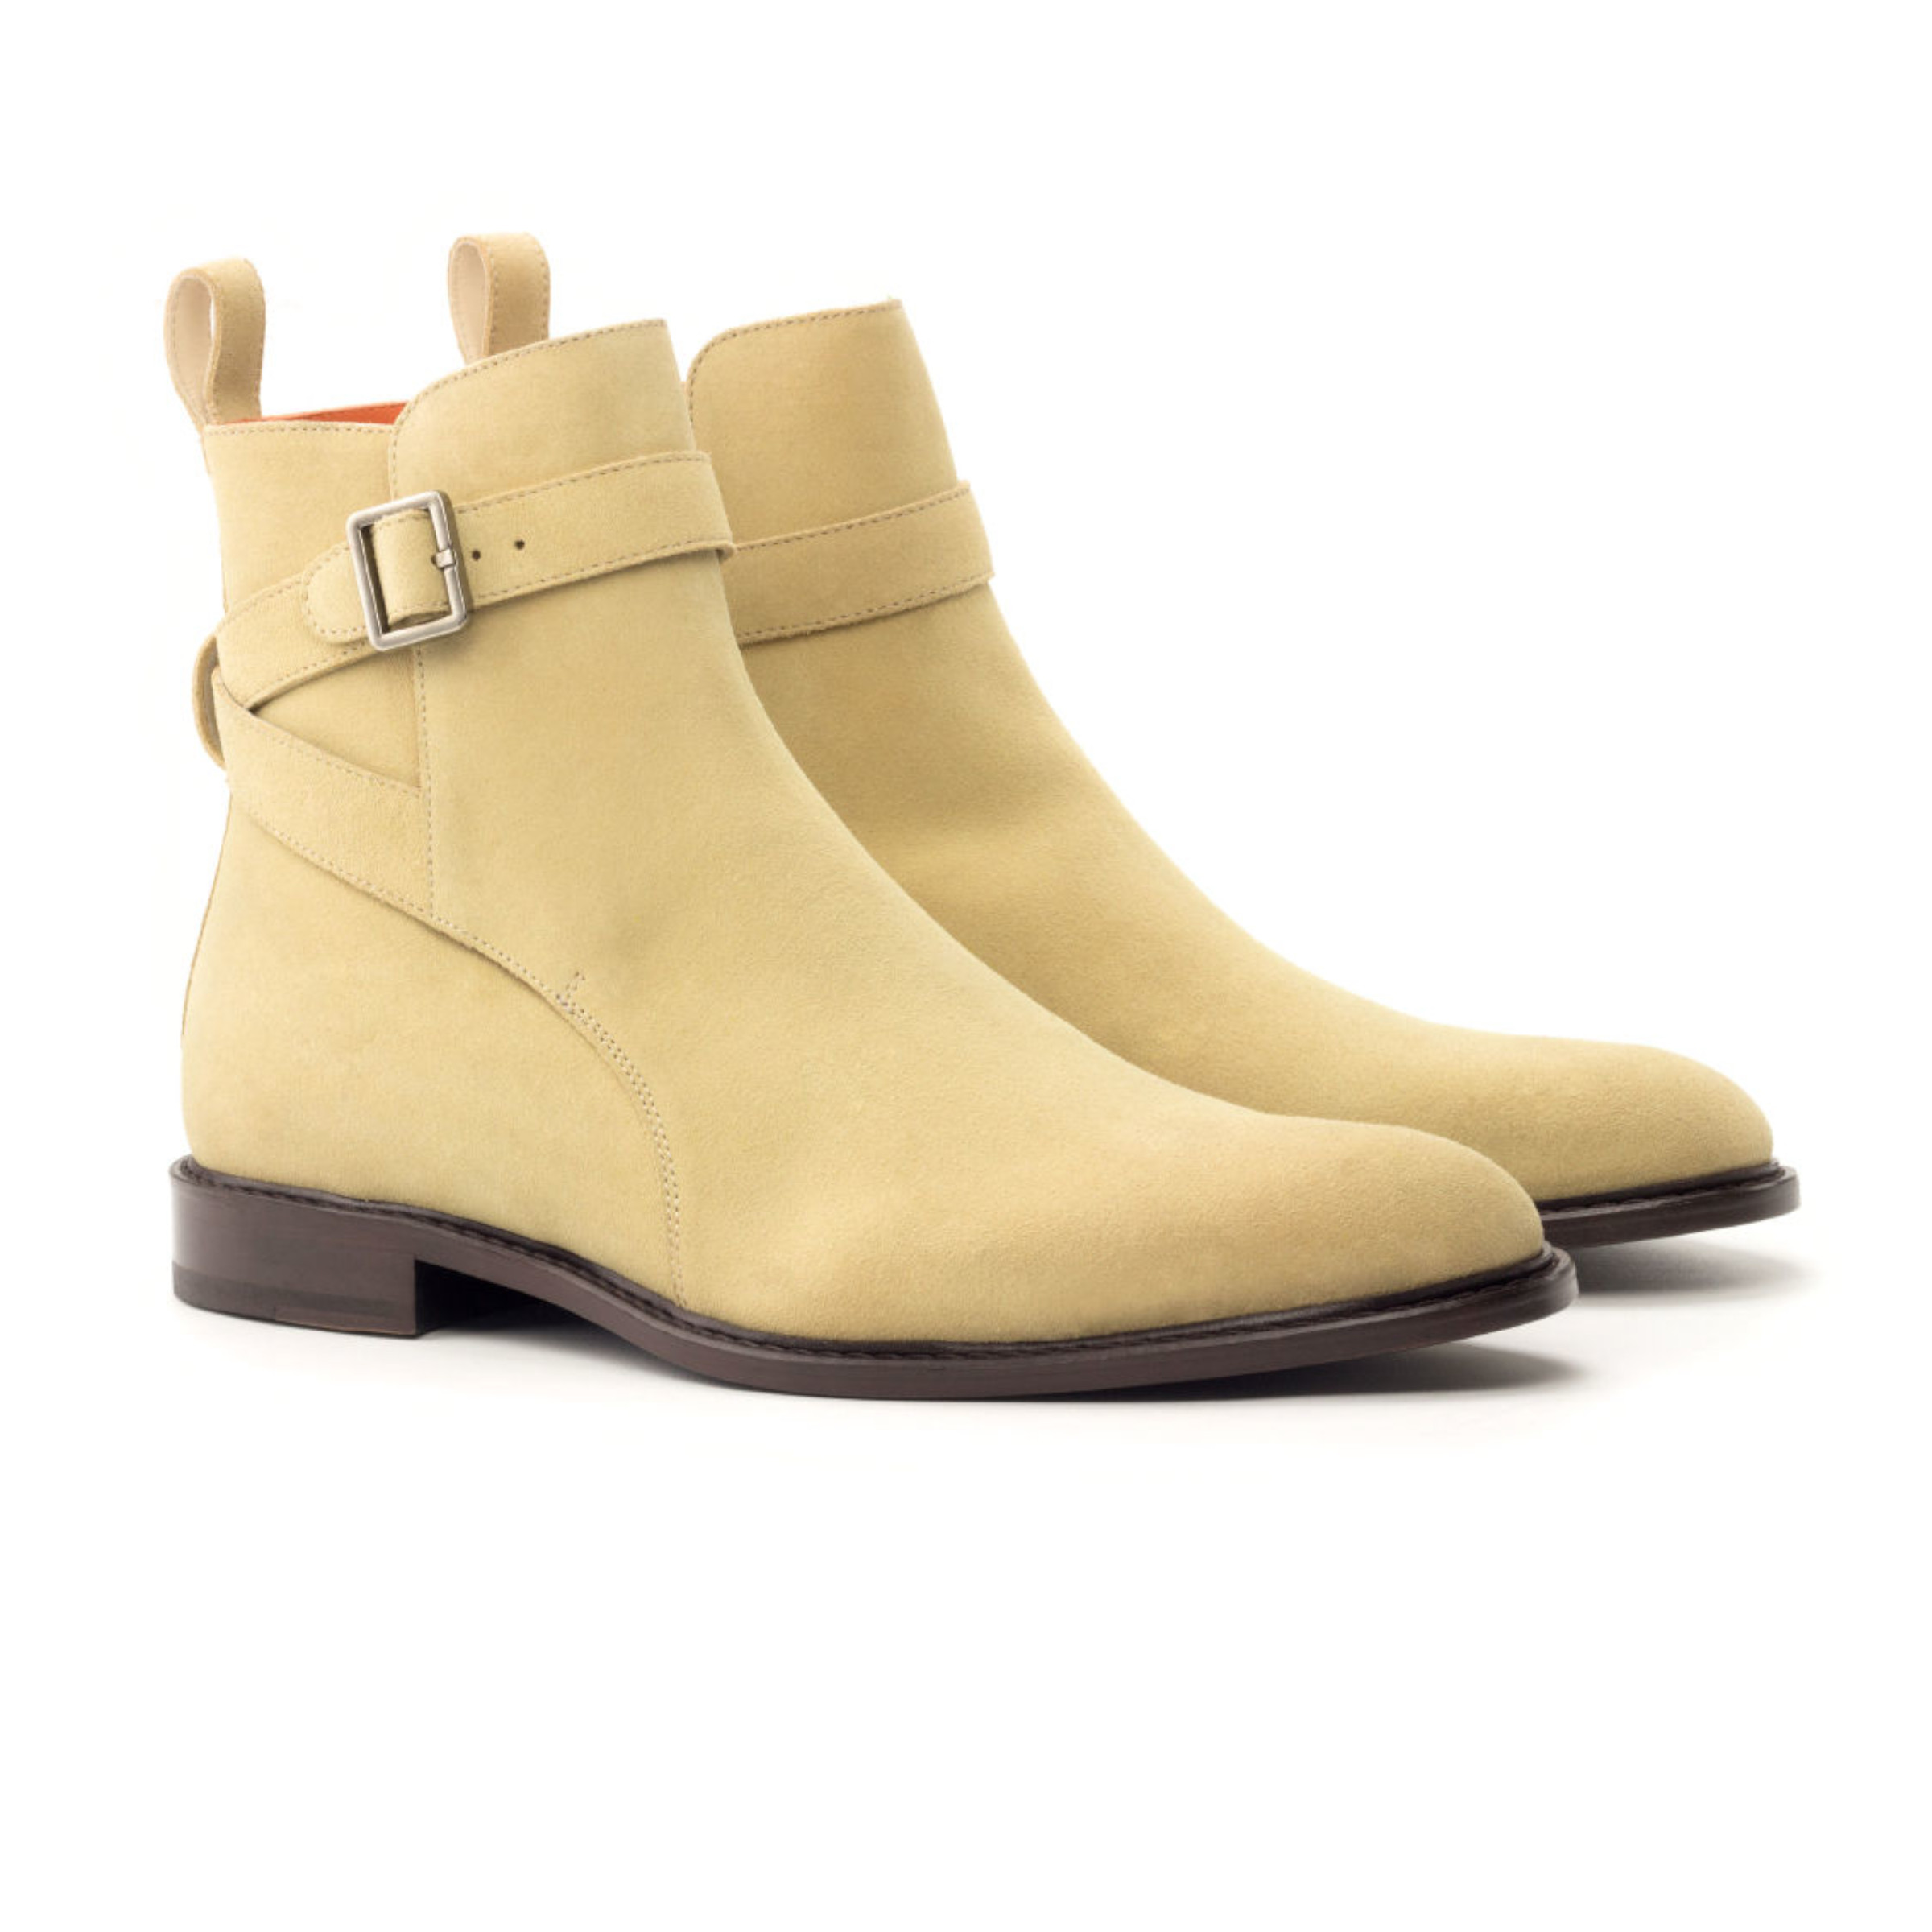 The Stallion: Camel Suede. Sand colored luxury suede ankle style riding boot with strap and buckle on a white background